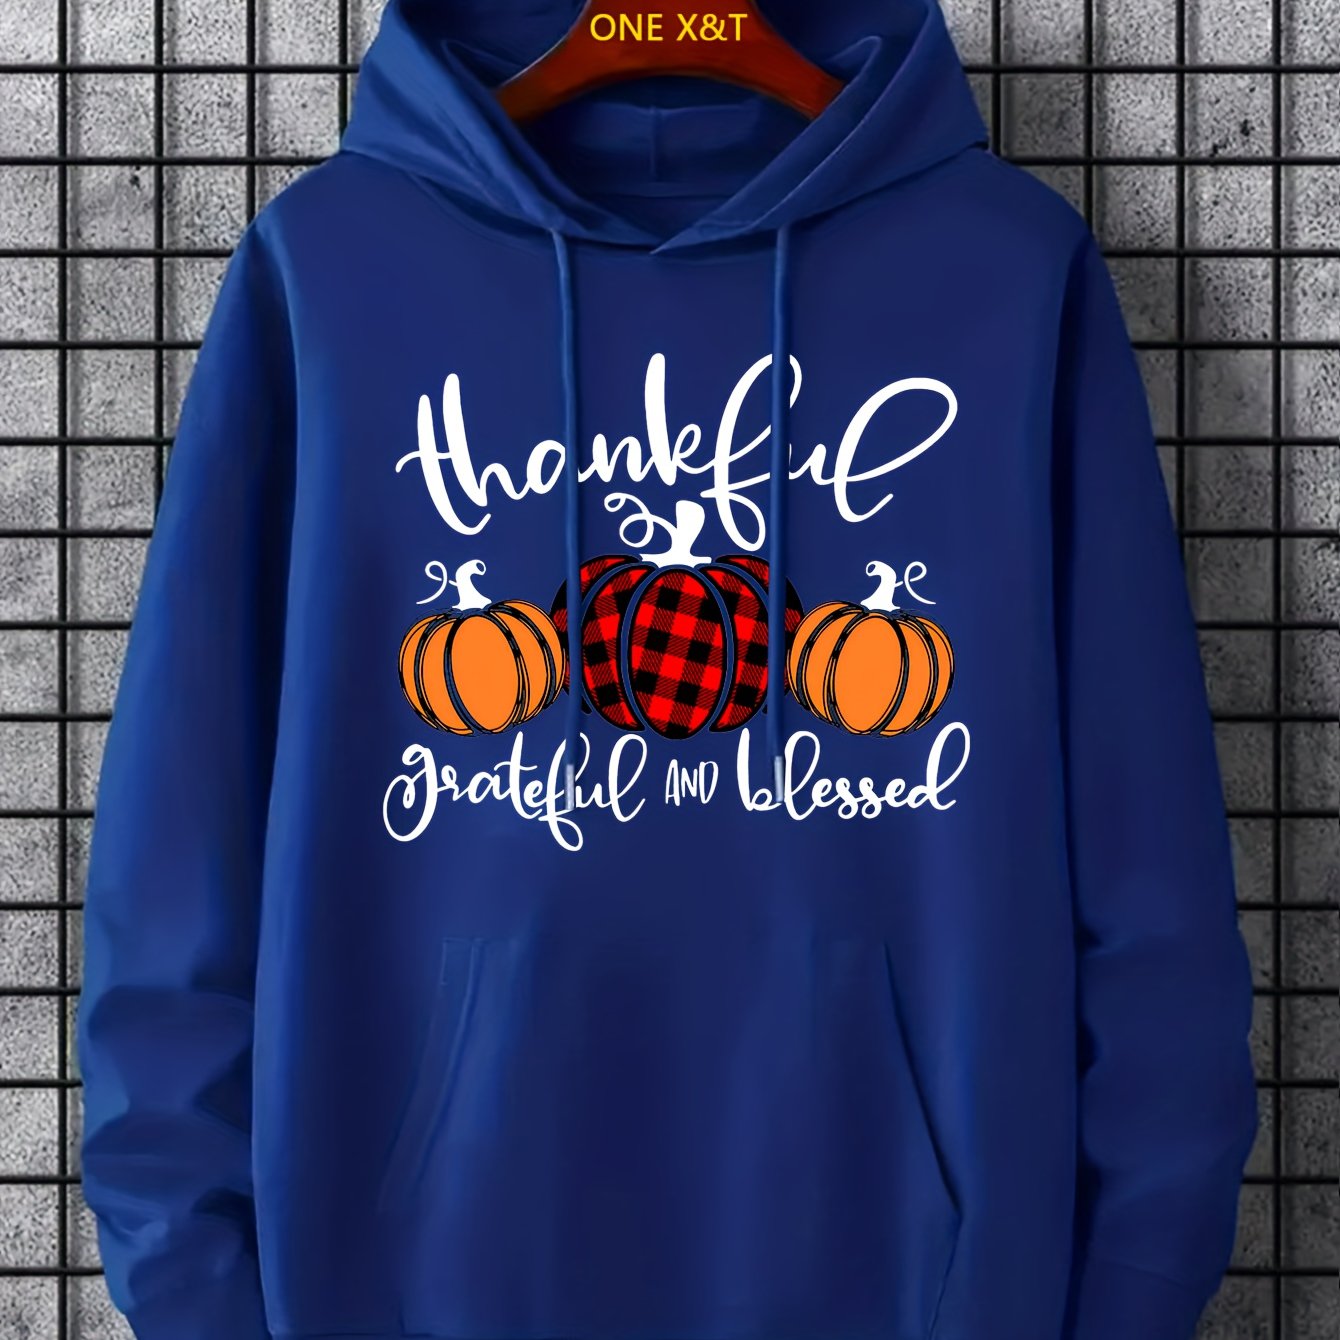 Thankful, Grateful And Blessed (Thanksgiving Themed) Men's Christian Pullover Hooded Sweatshirt claimedbygoddesigns